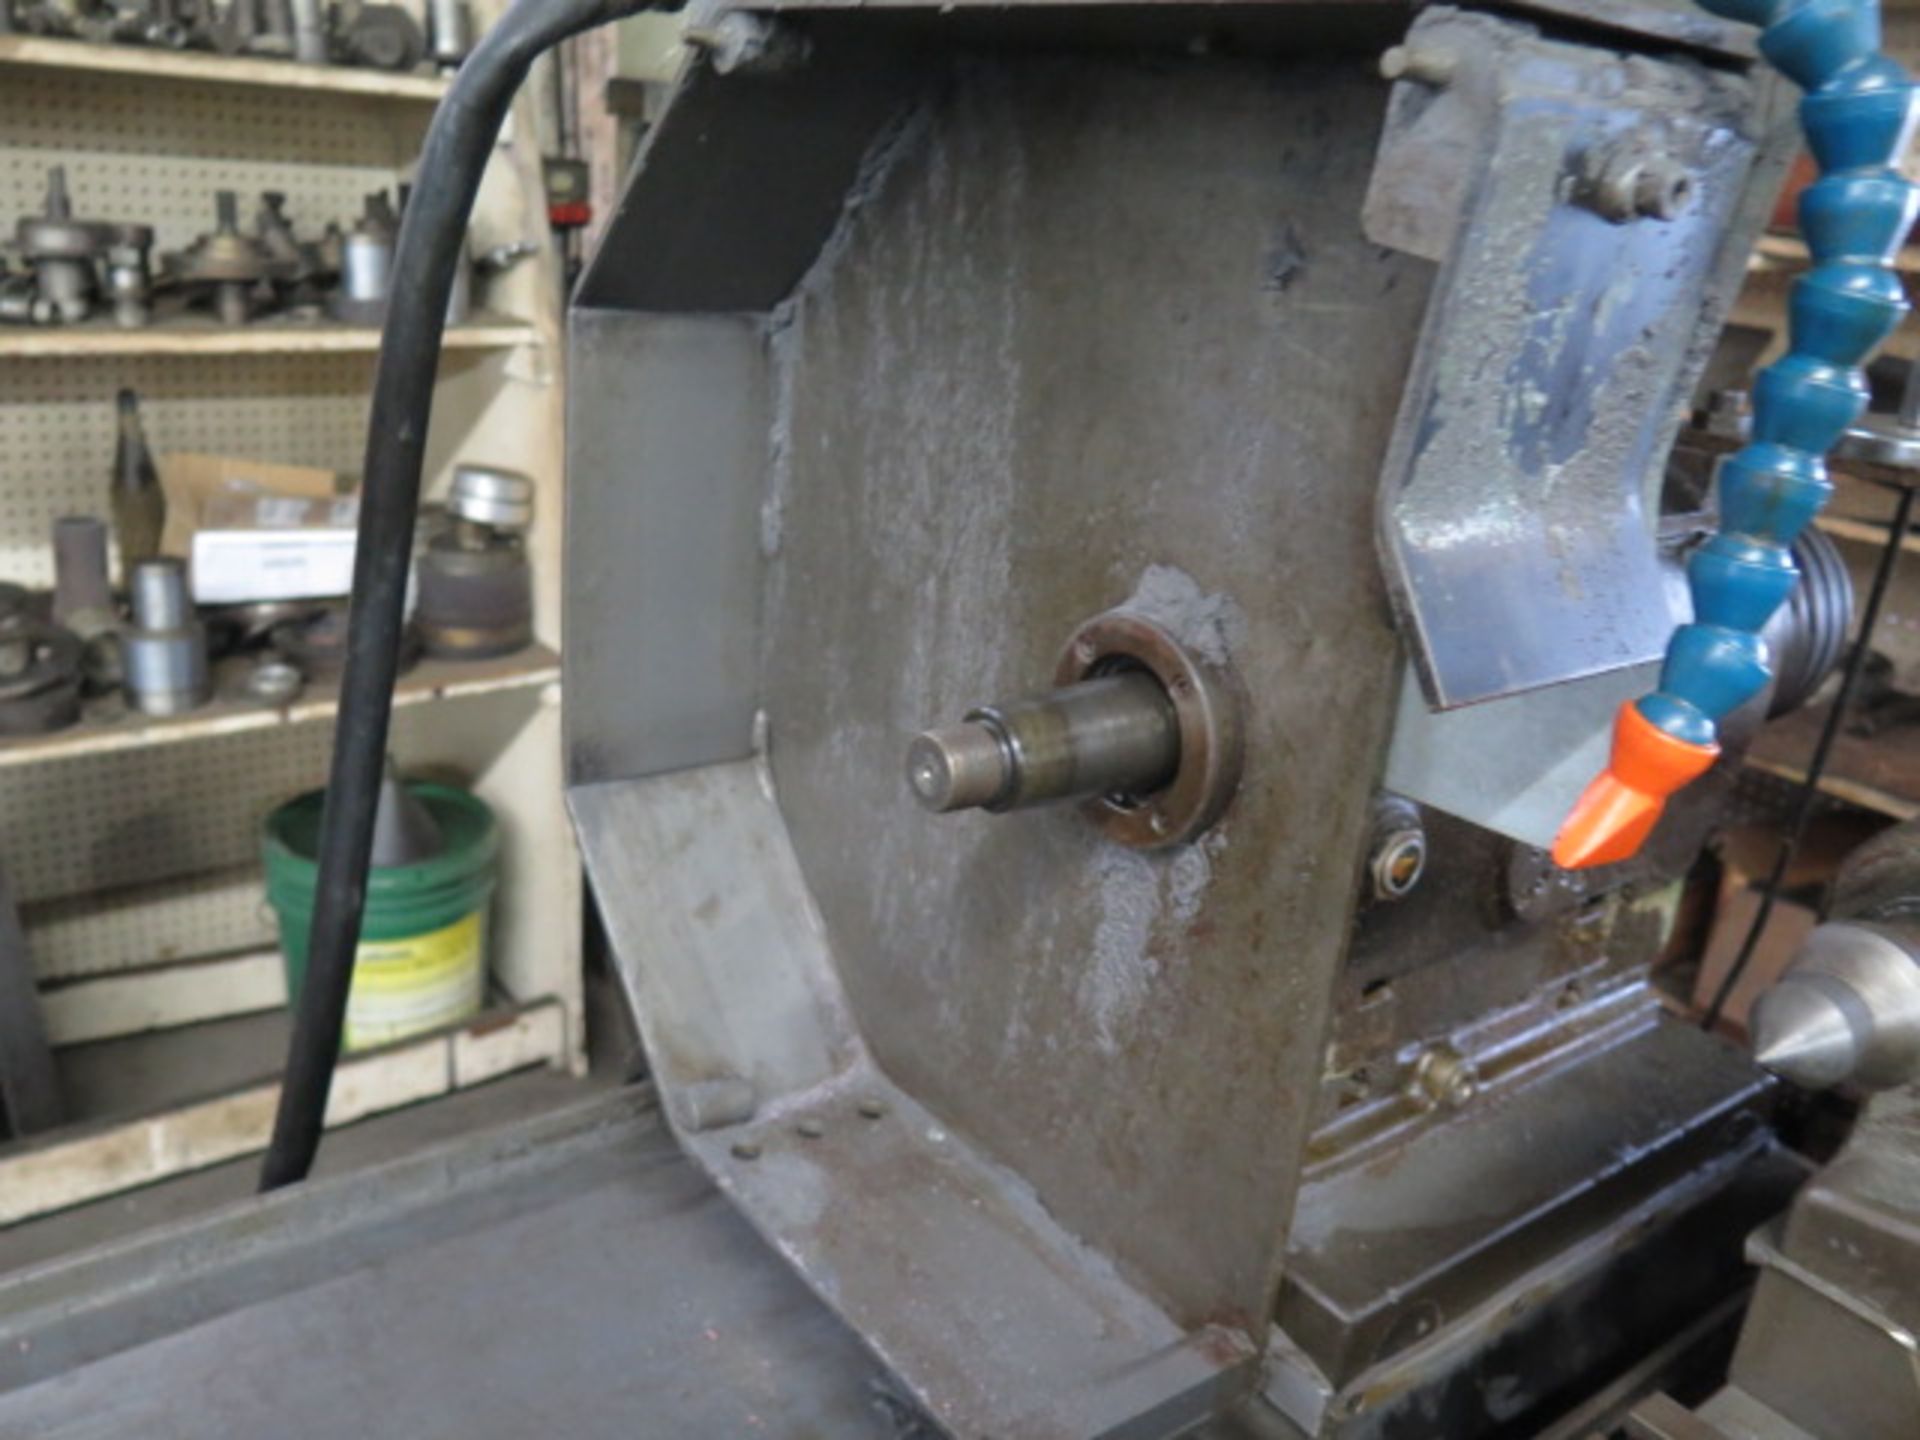 H. Tschudin HTG-600 Cylindrical Grinder s/n 64171 w/ Motorized Work Head, Tailstock, SOLD AS IS - Image 8 of 14